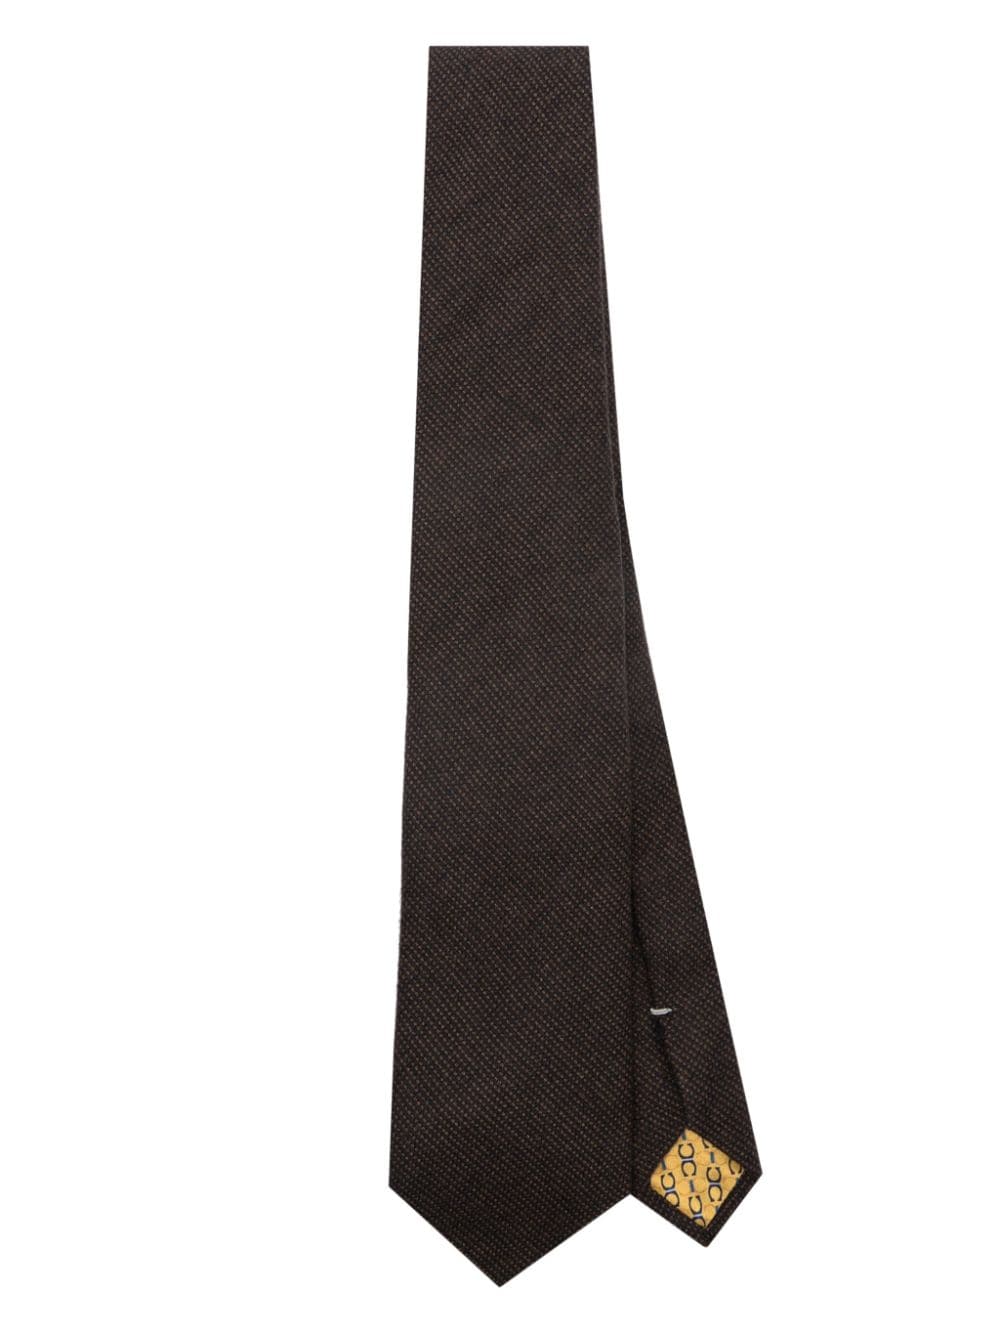 Canali patterned-jacquard tie - Brown von Canali